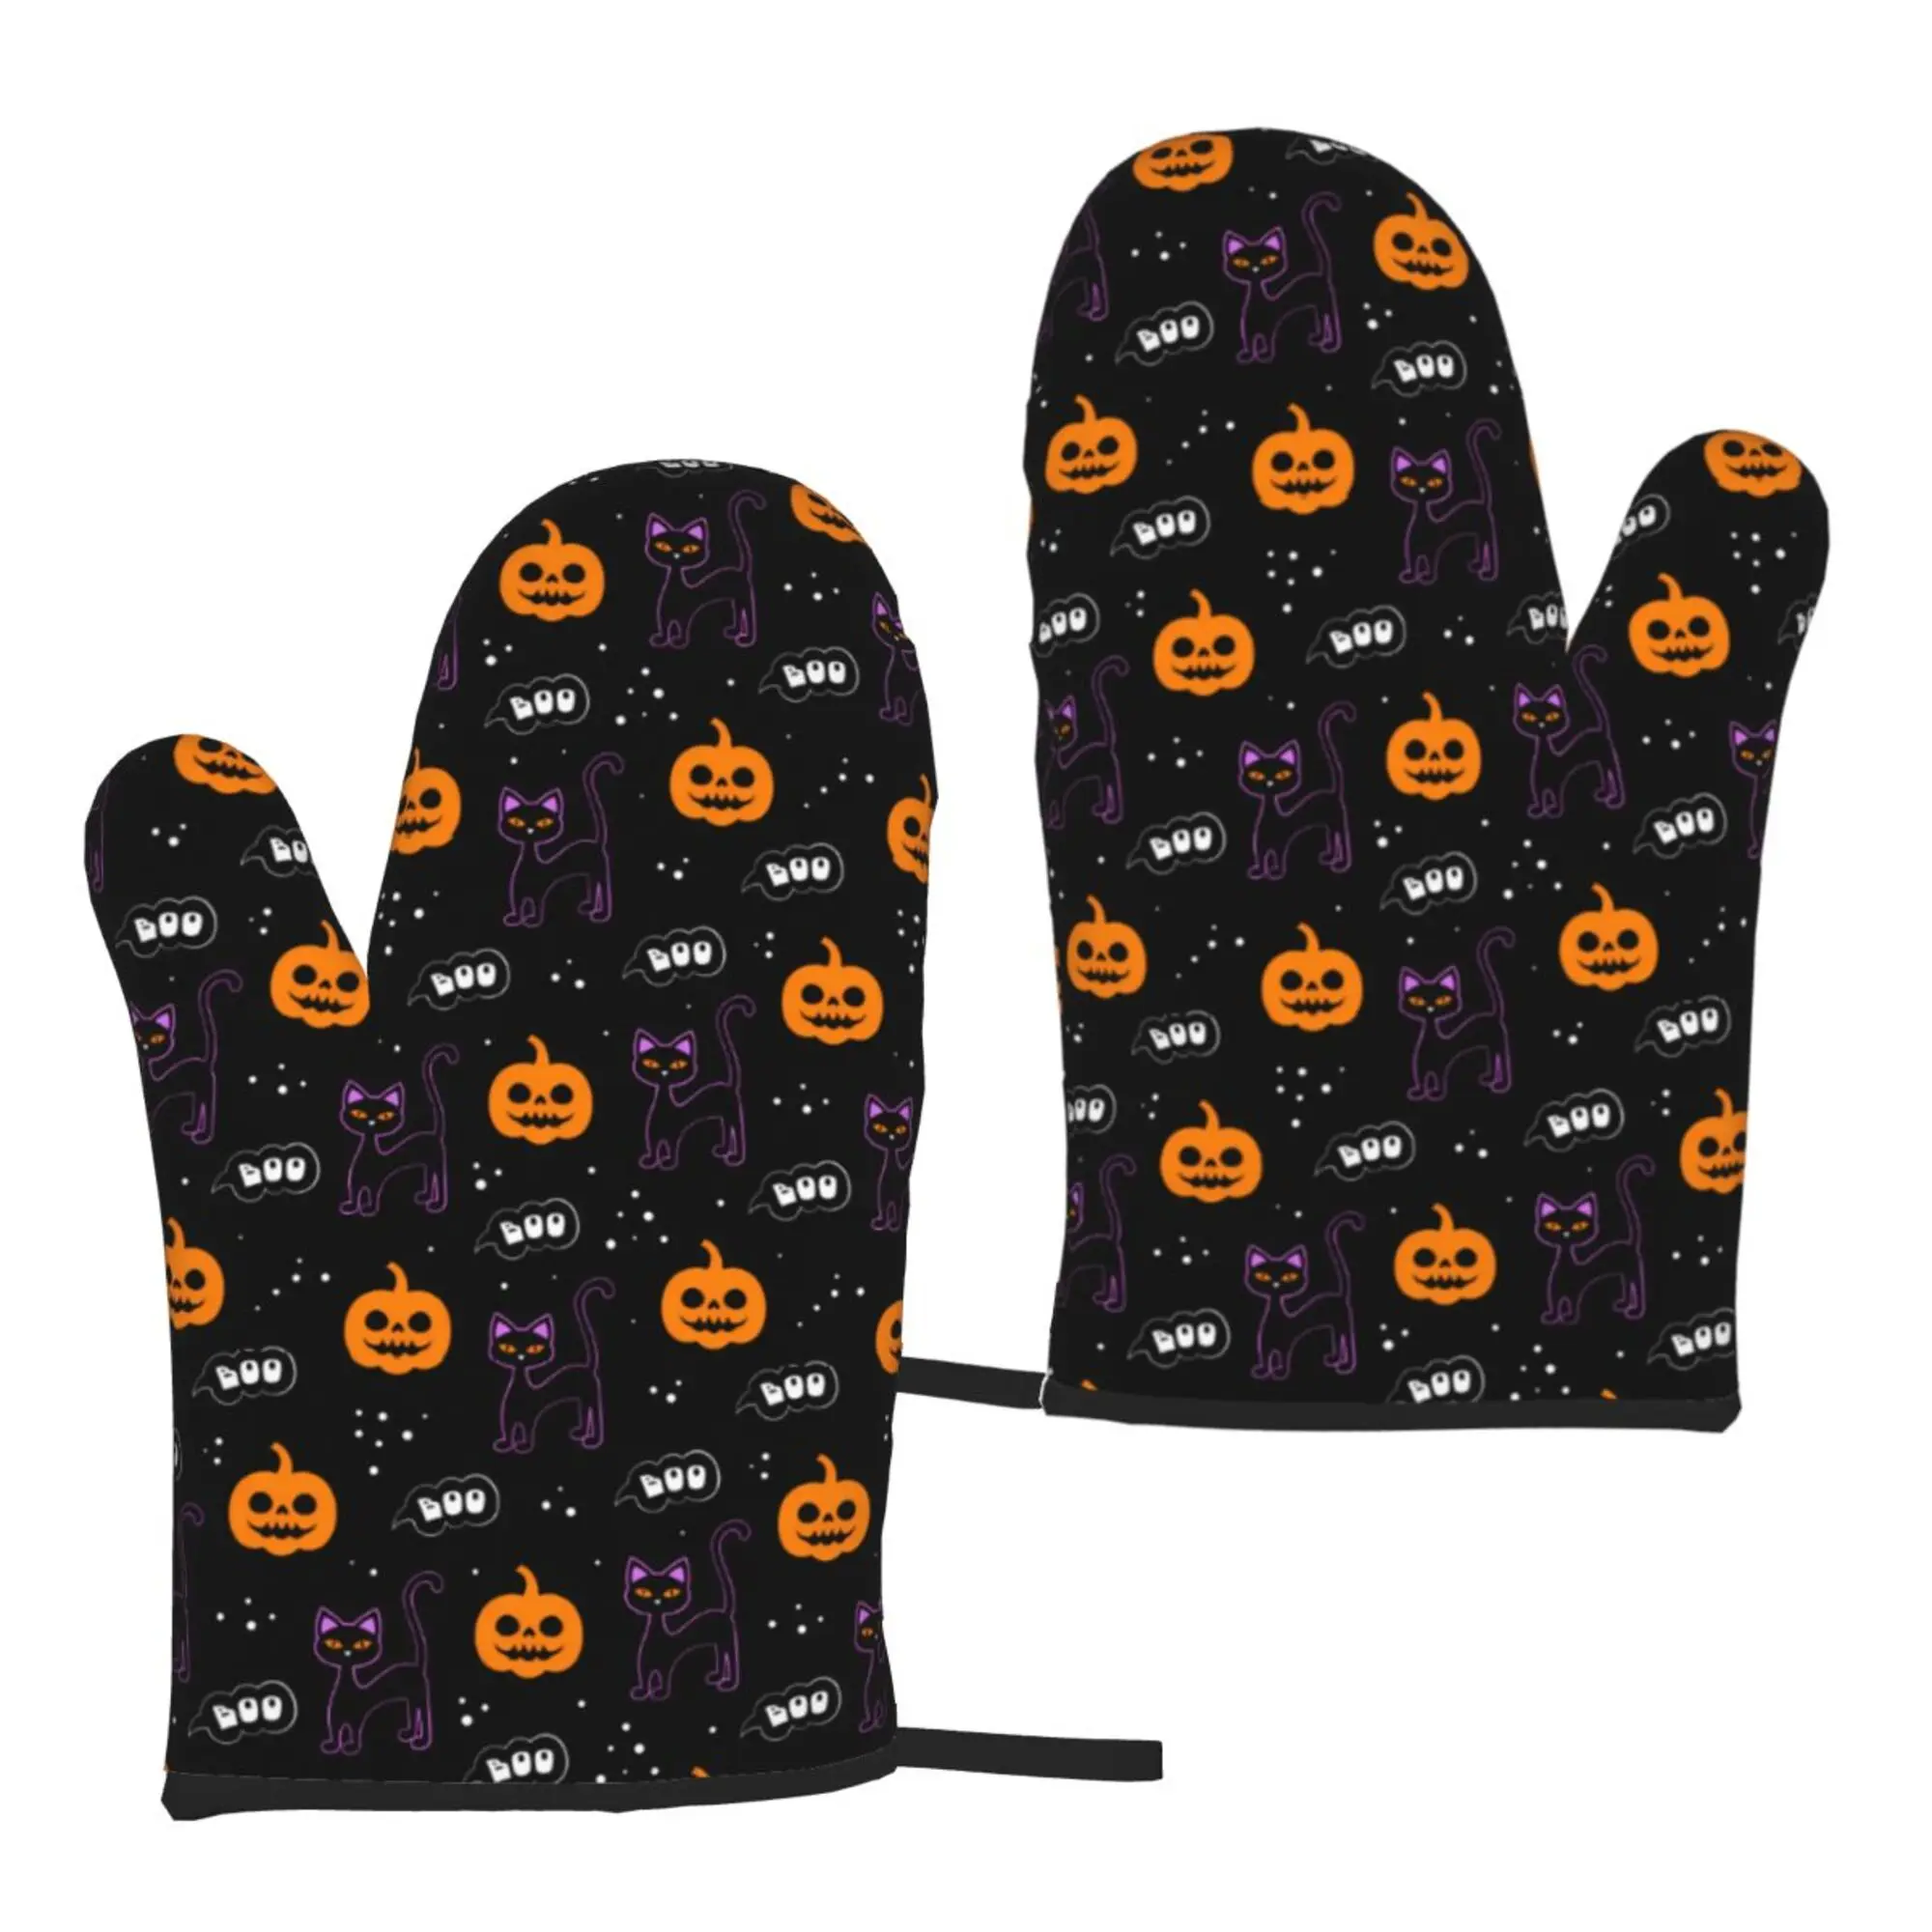 Black Cat Boo Pumpkin Halloween Oven Mitts 2pc Microwave Gloves Bbq Cooking Gloves Heat Resistant Kitchen Gloves One Size 2pc 3d cartoon cat paws oven mitts long cotton baking insulation microwave heat resistant non slip gloves animal kitchen gloves